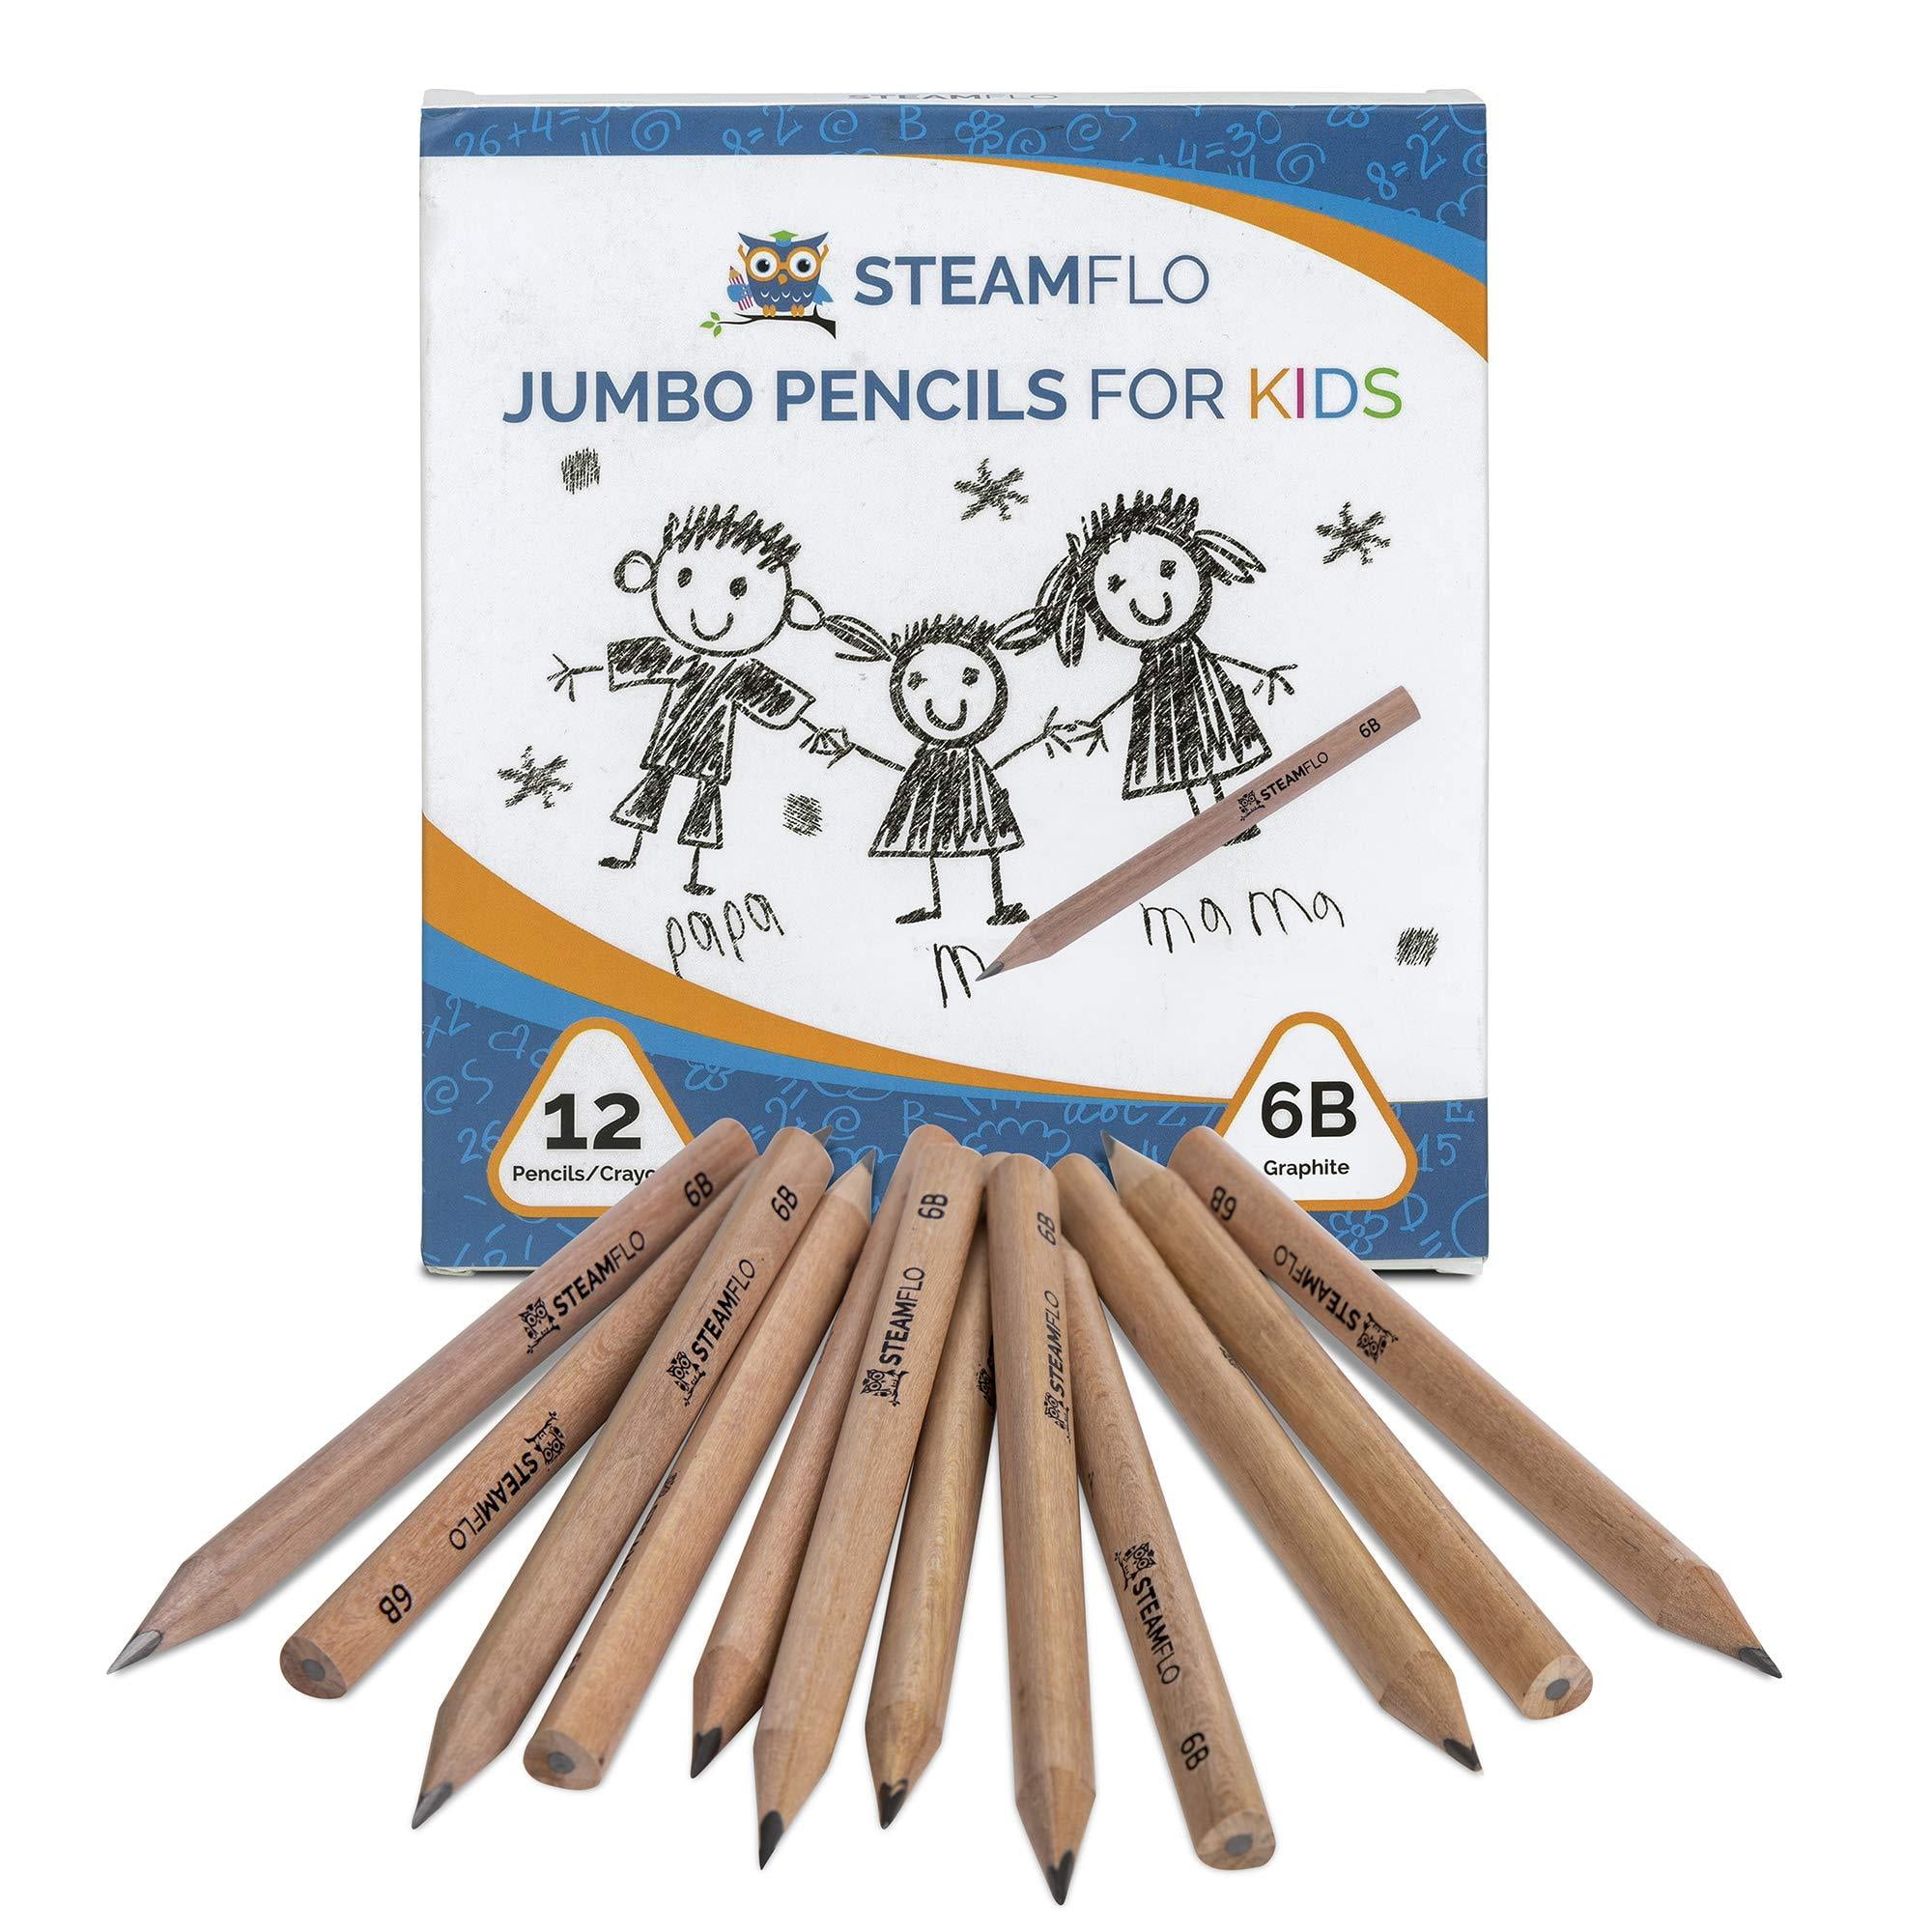 3.5 Inch Pencils for Kids Preschoolers Toddlers Kindergarten with Eraser and Sharpener by OPIHAZAT Short Triangular Fat Pencils,12 Pcs Jumbo Wood Pencils for Writing and Drawing 